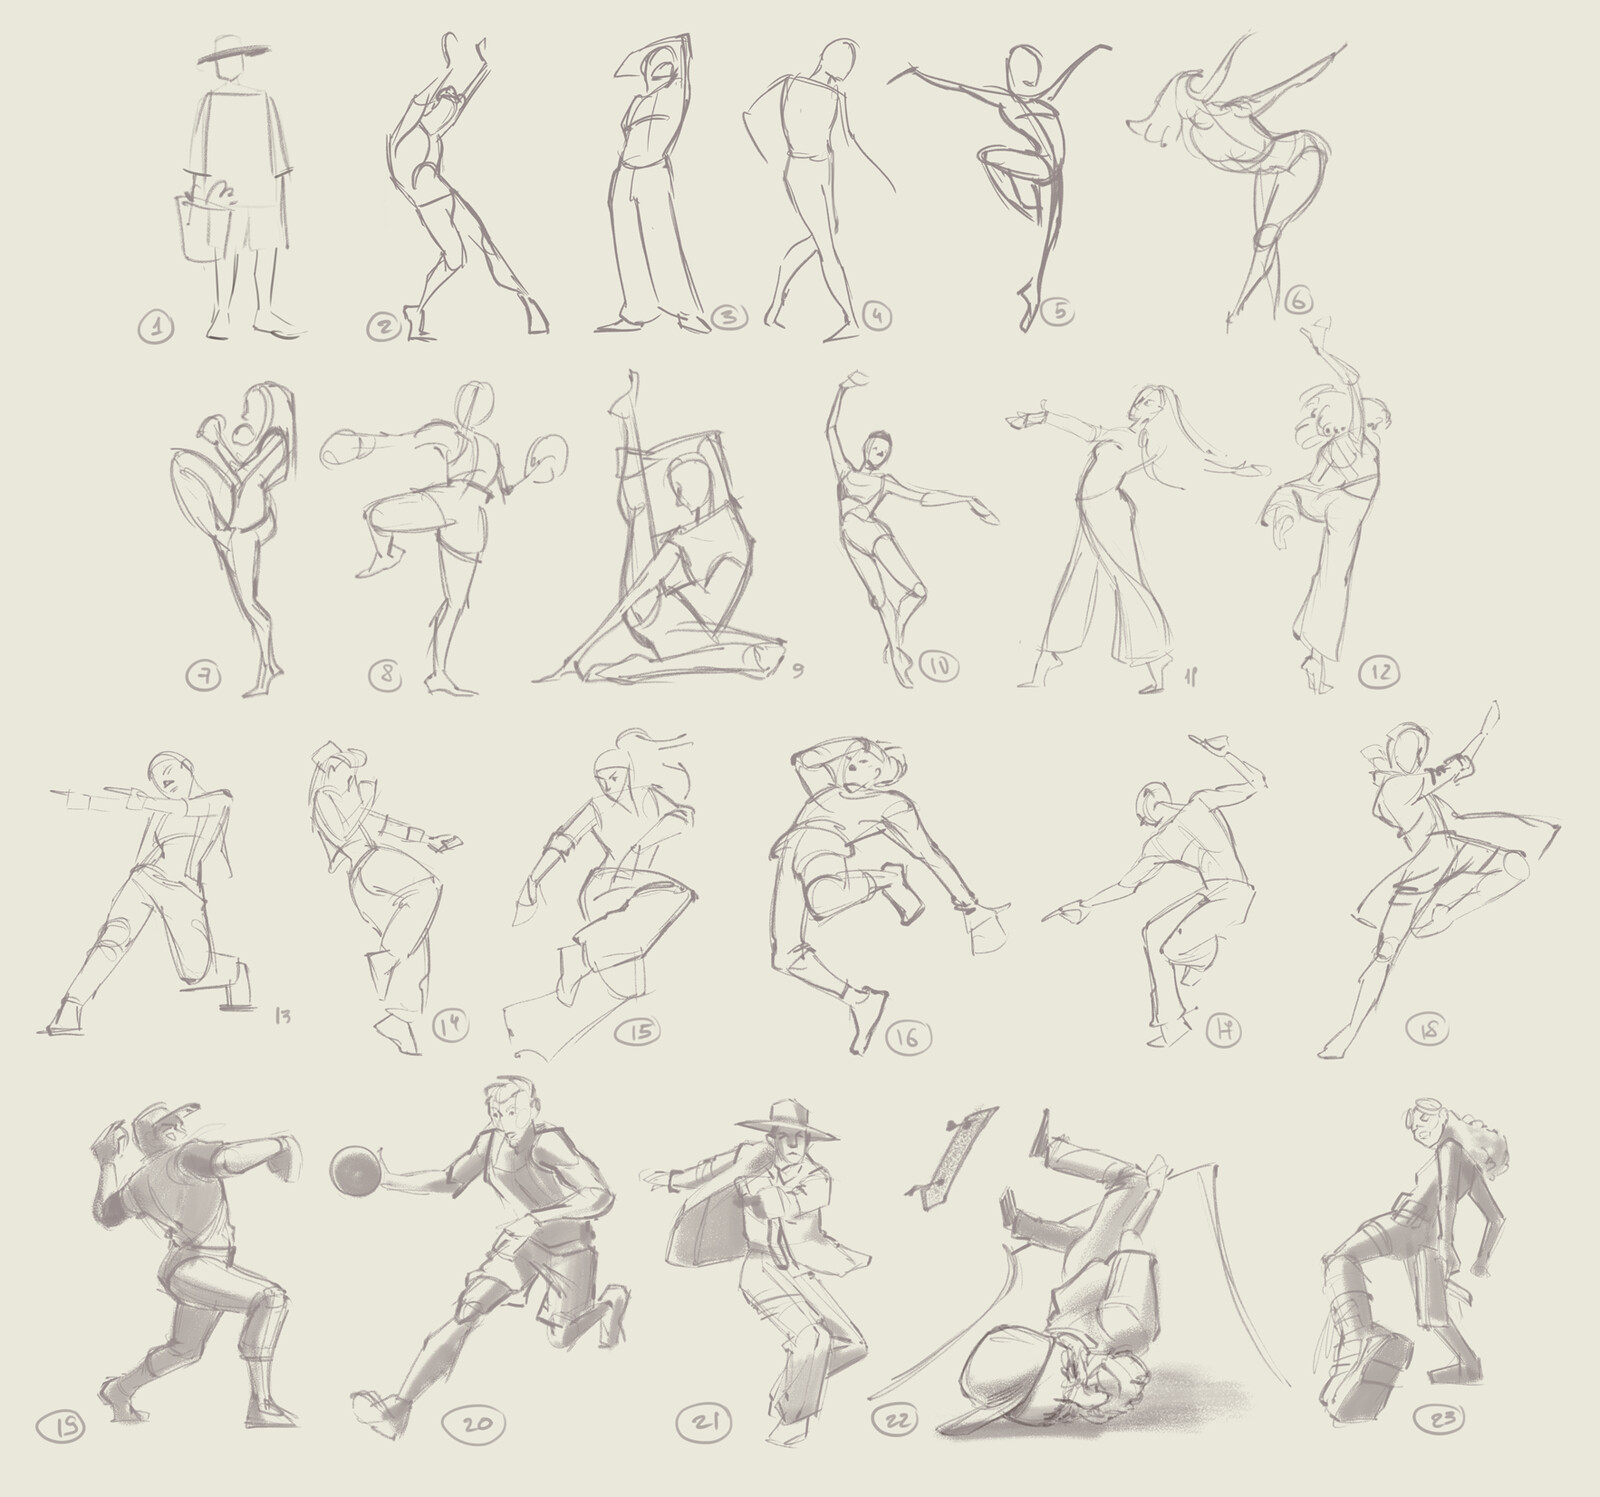 1 to 5 min gesture sketches from Projector workshop (2022)